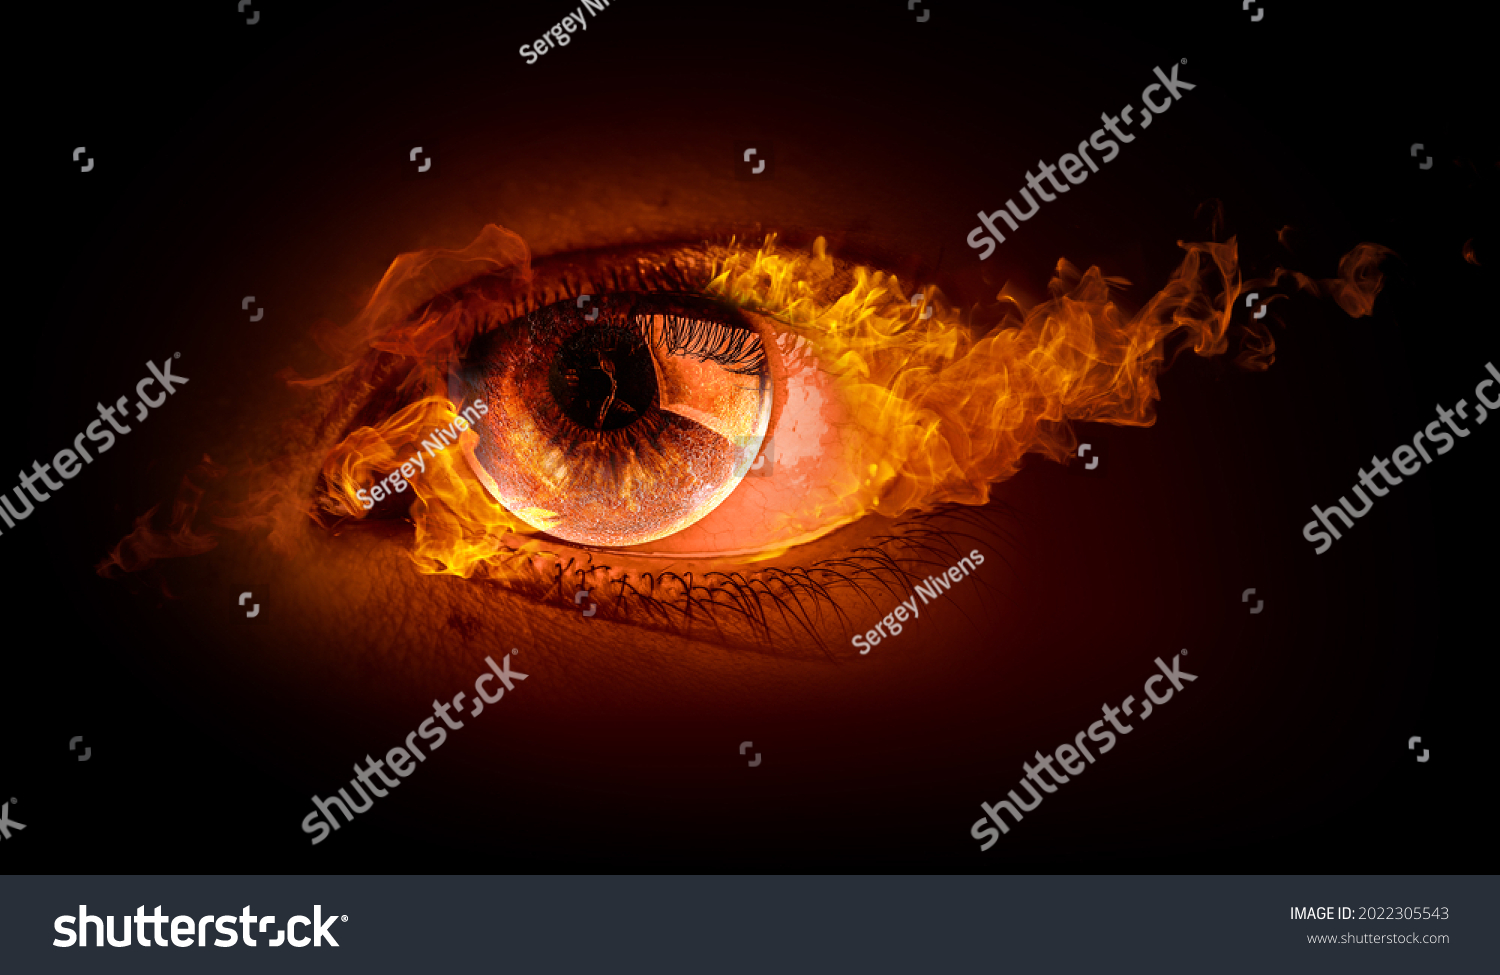 Macro image of human eye with fire flames . Mixed media #2022305543